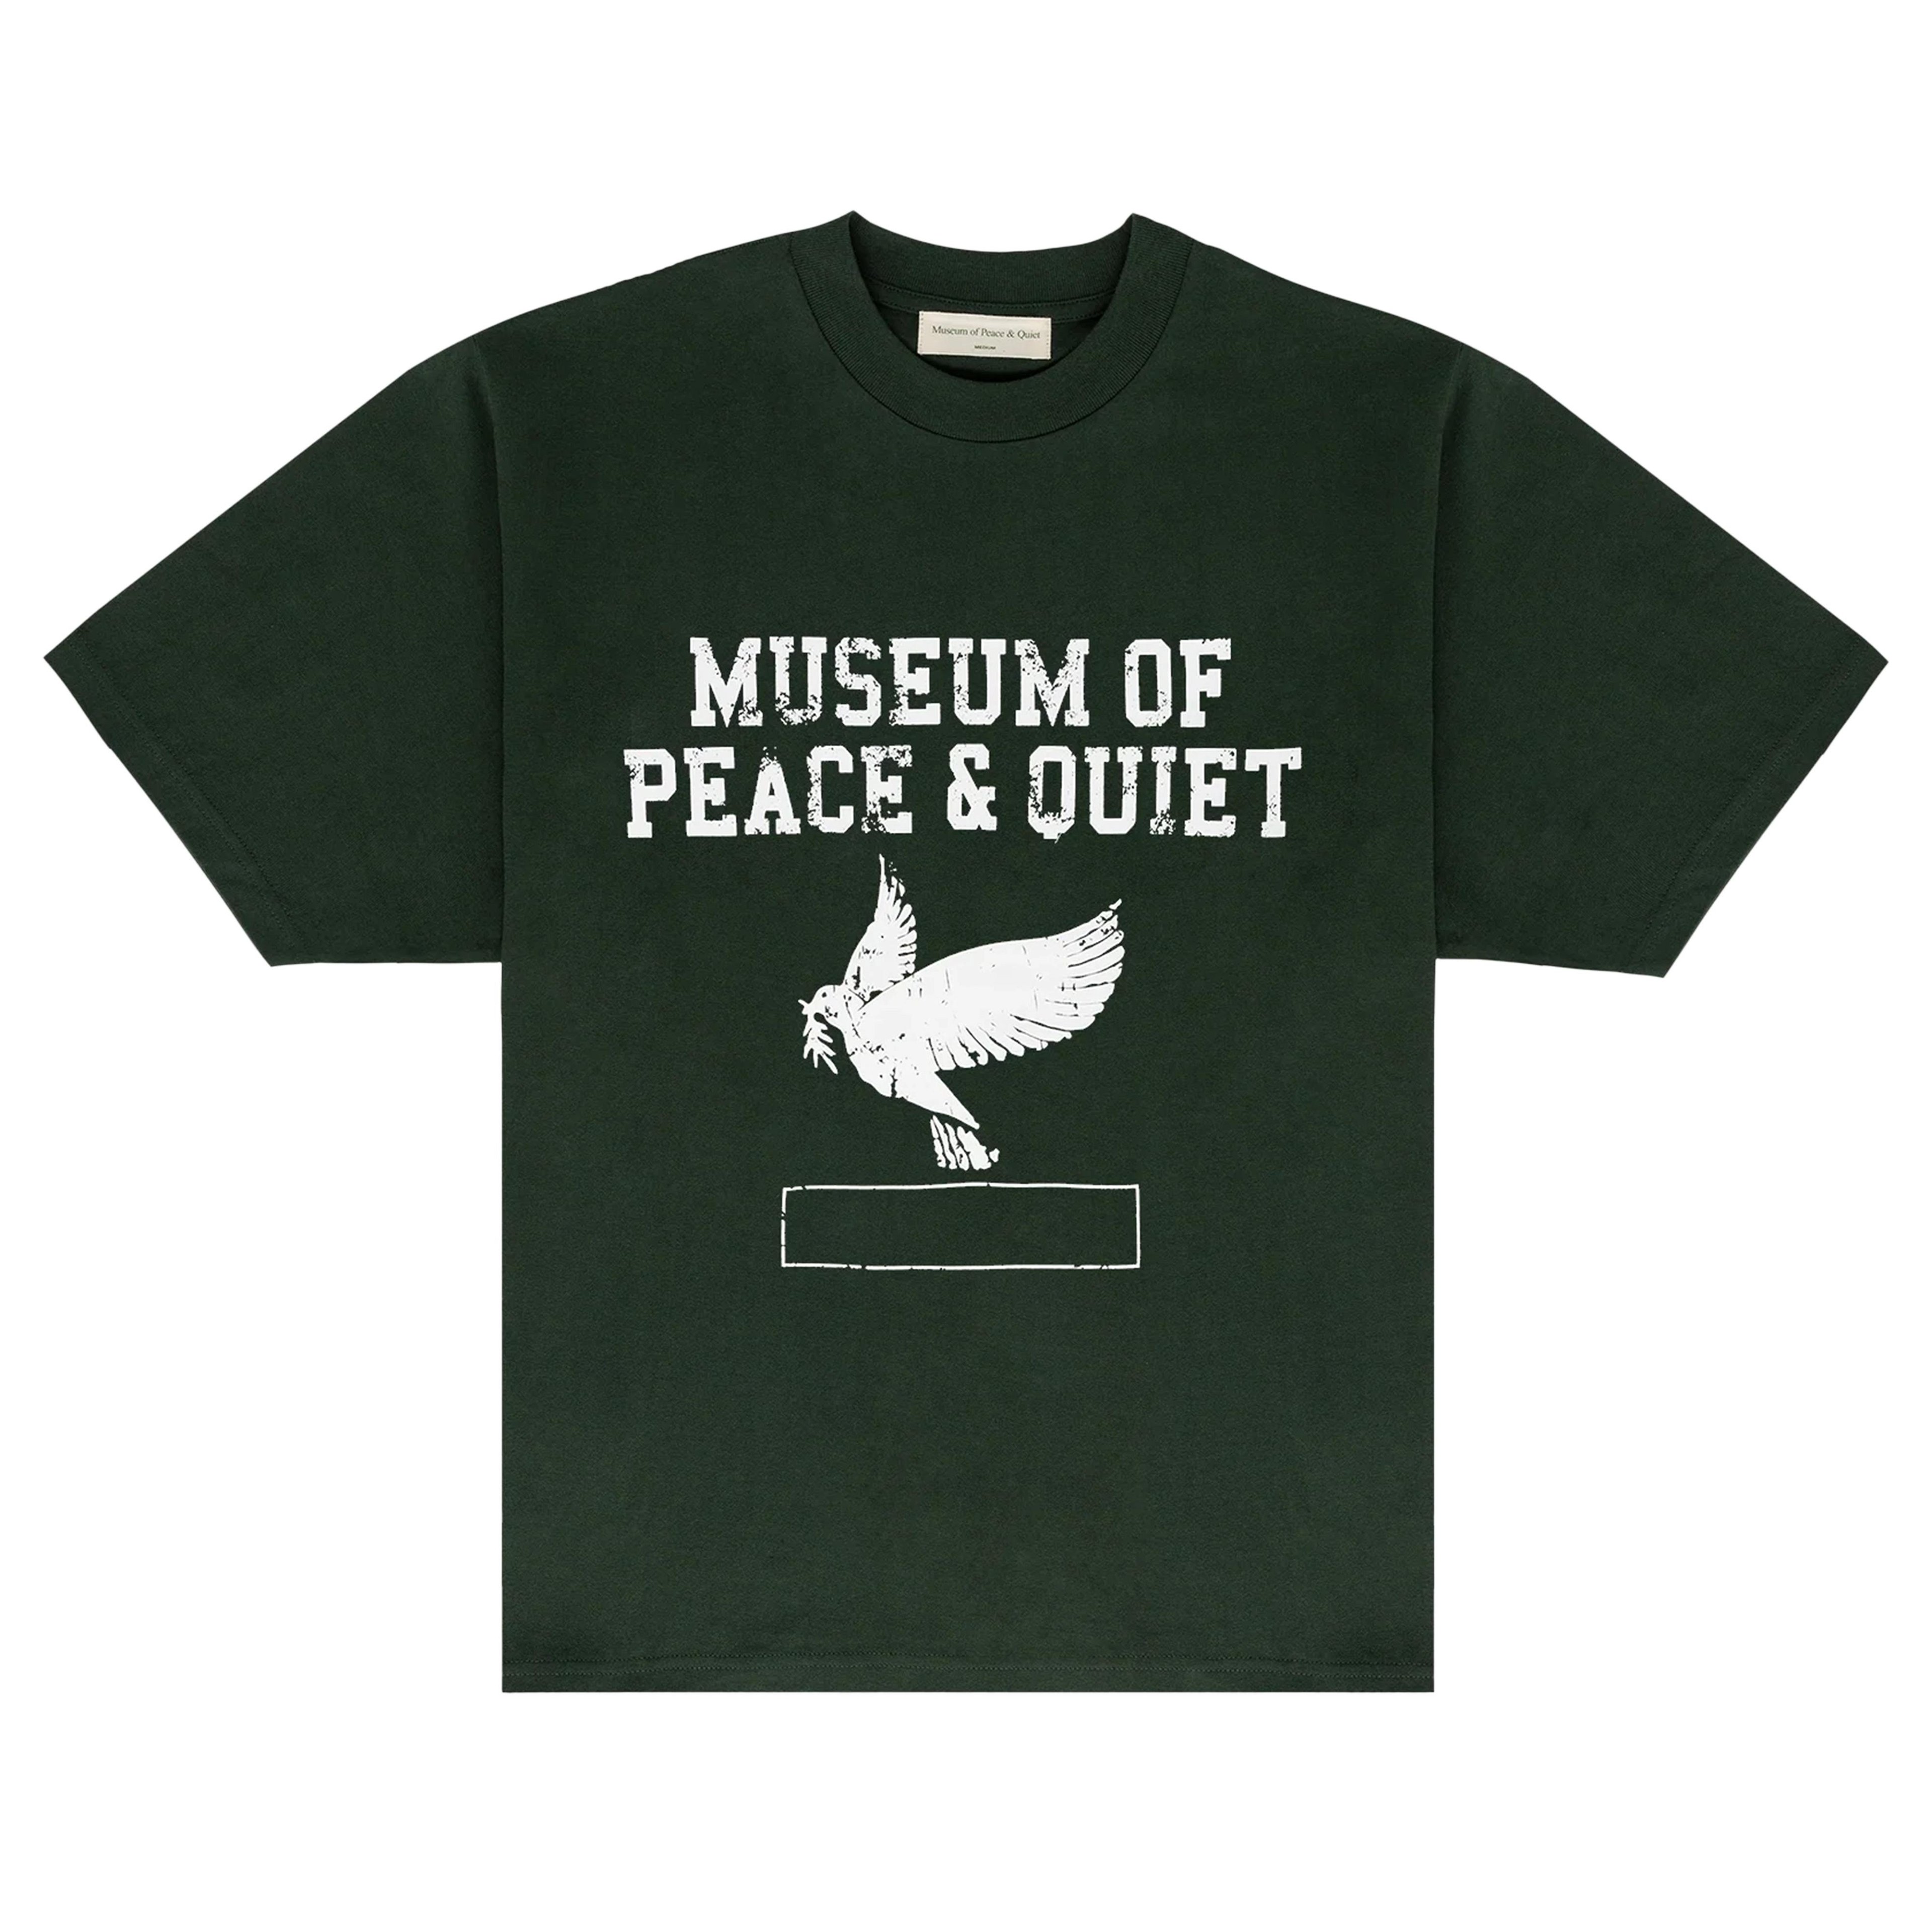 MUSEUM OF PEACE AND QUIET - P.E. T-Shirt - (Forest) by MUSEUM OF PEACE&QUIET